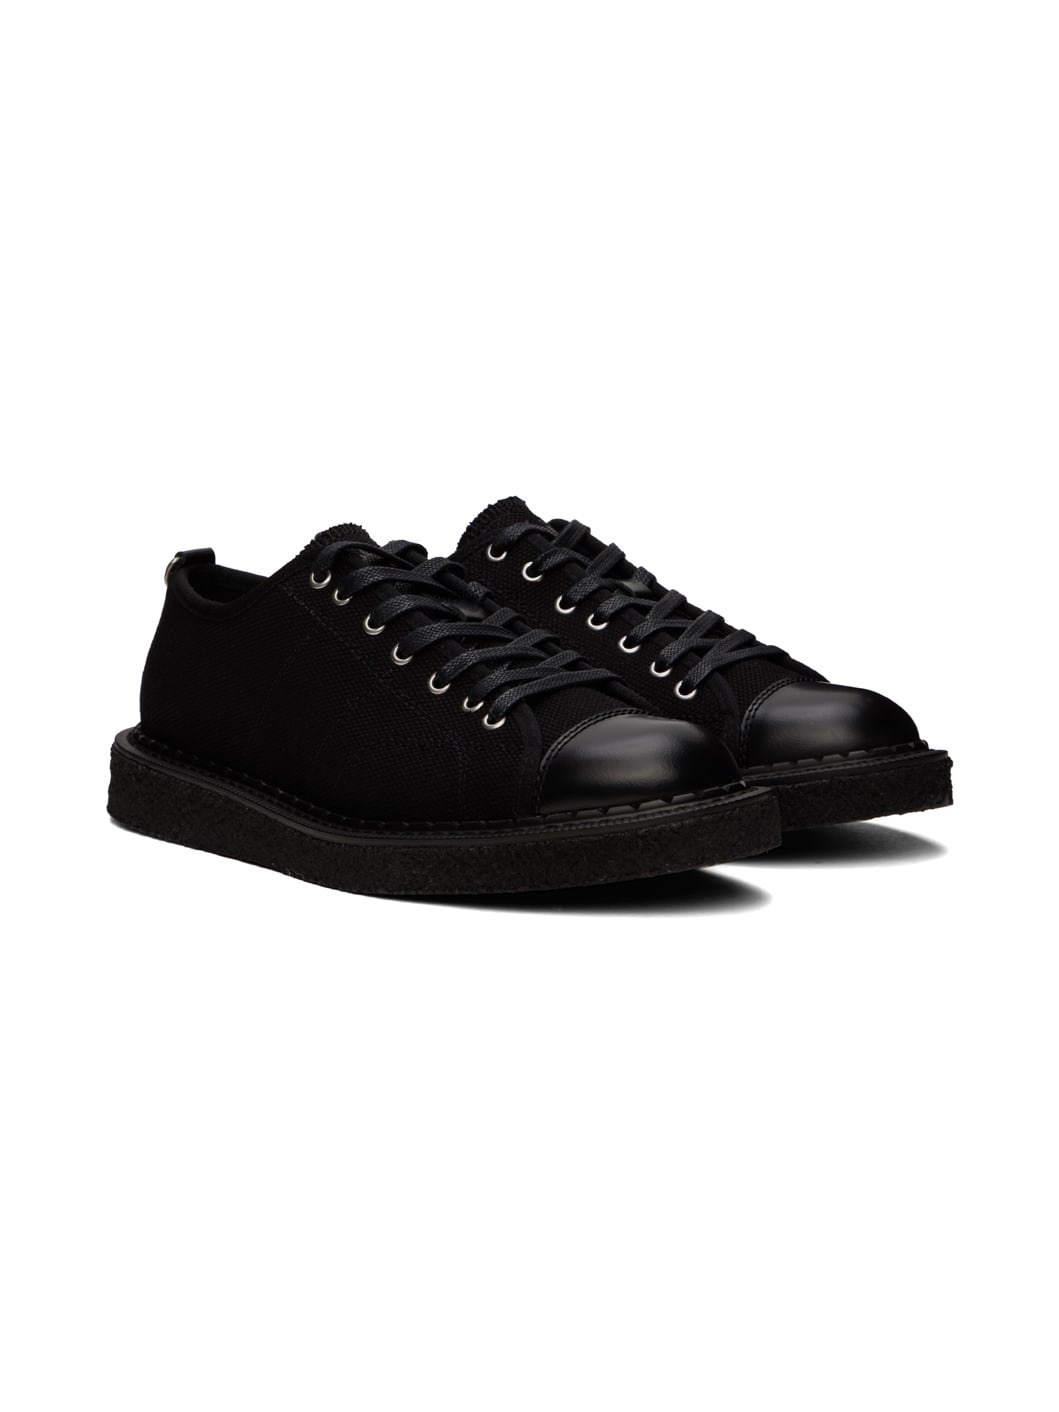 Black George Cox Edition Canvas Monkey Sneakers - 4